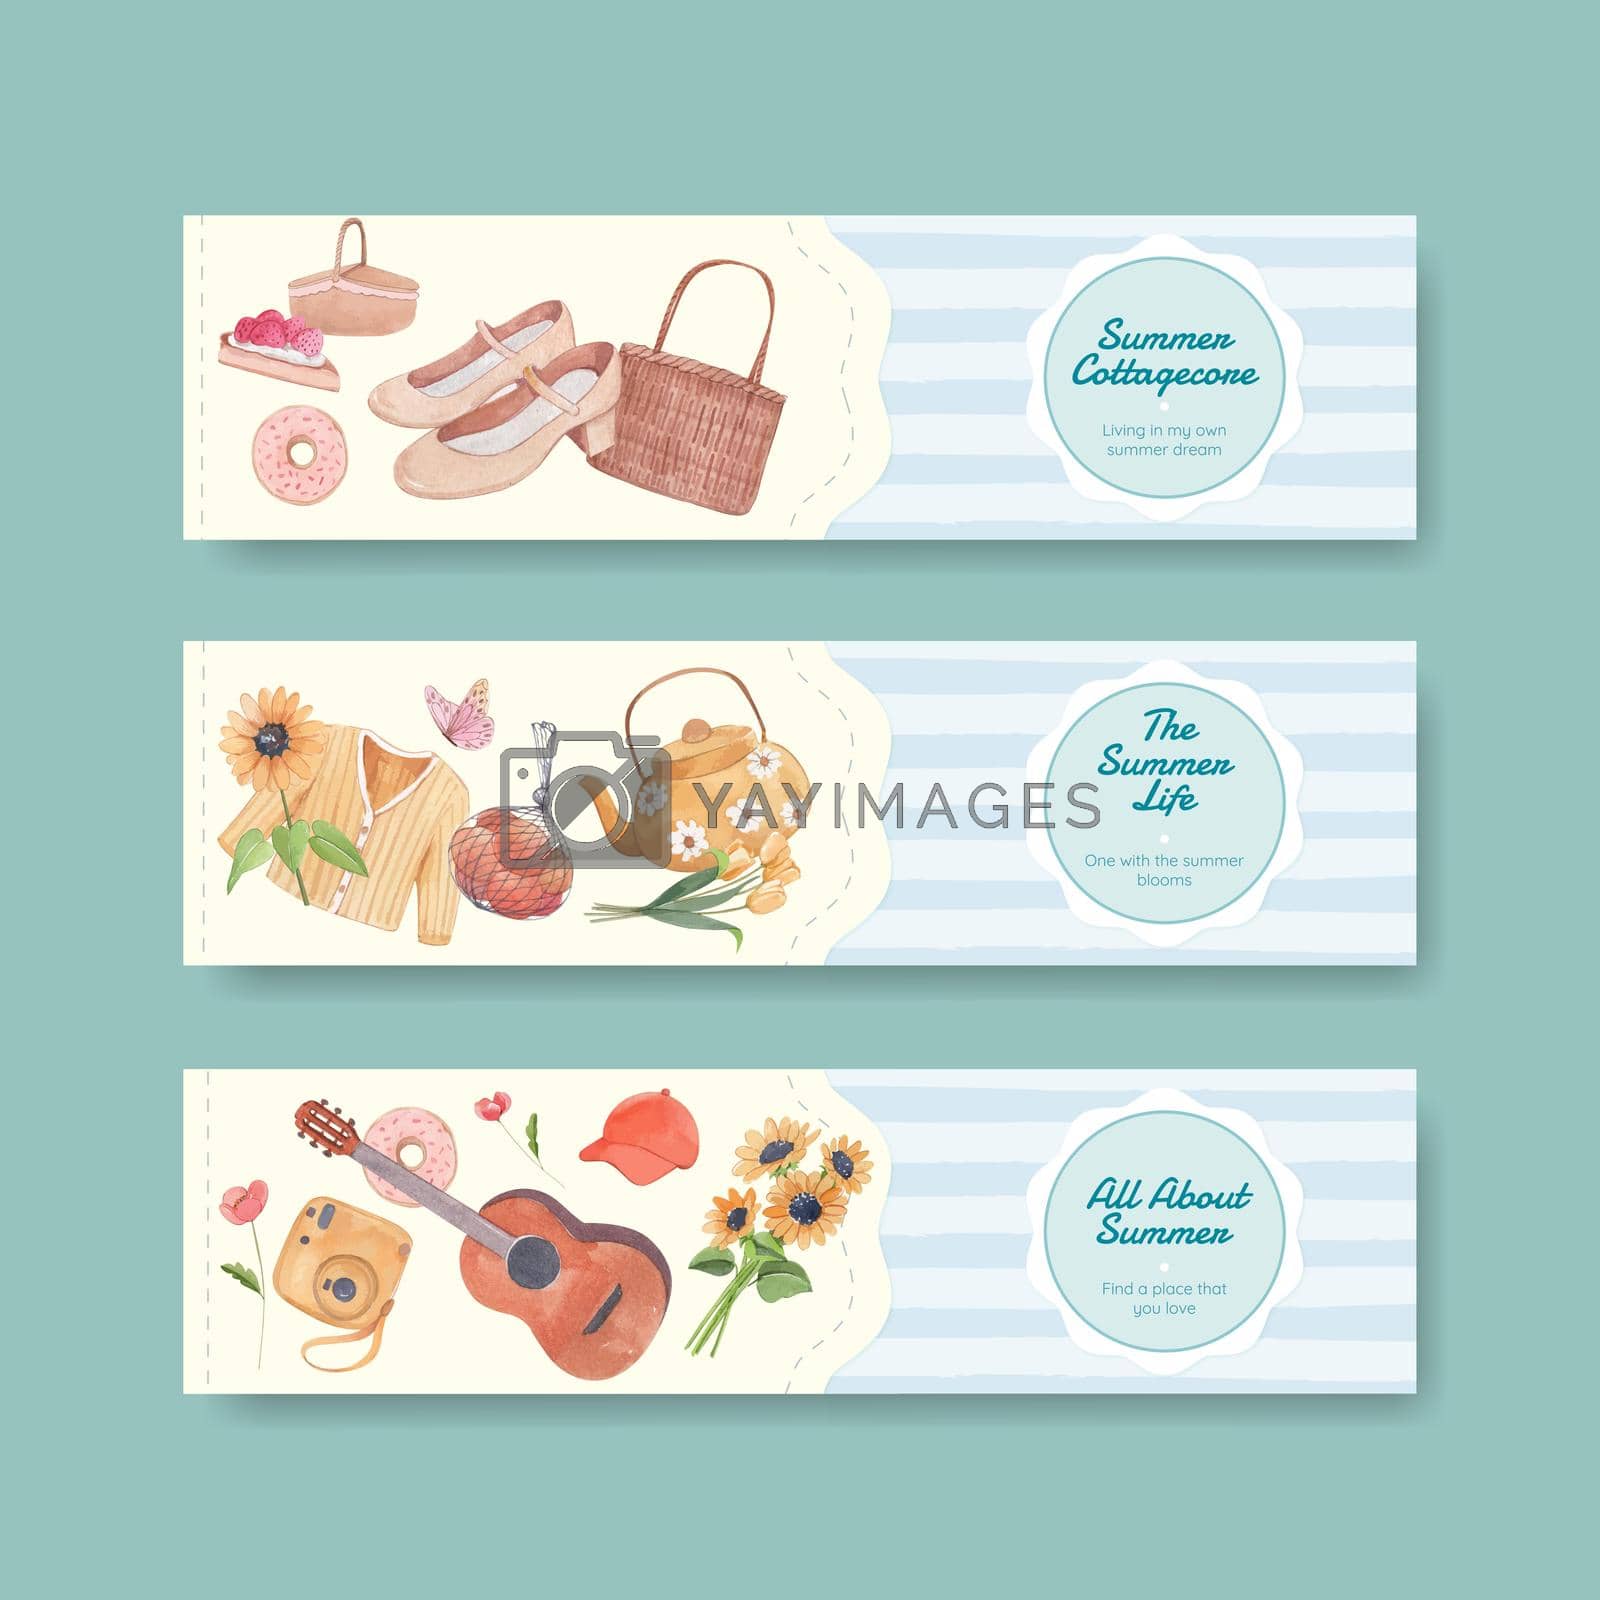 Royalty free image of banner template with summer cottagecore concept,watercolor style by Photographeeasia